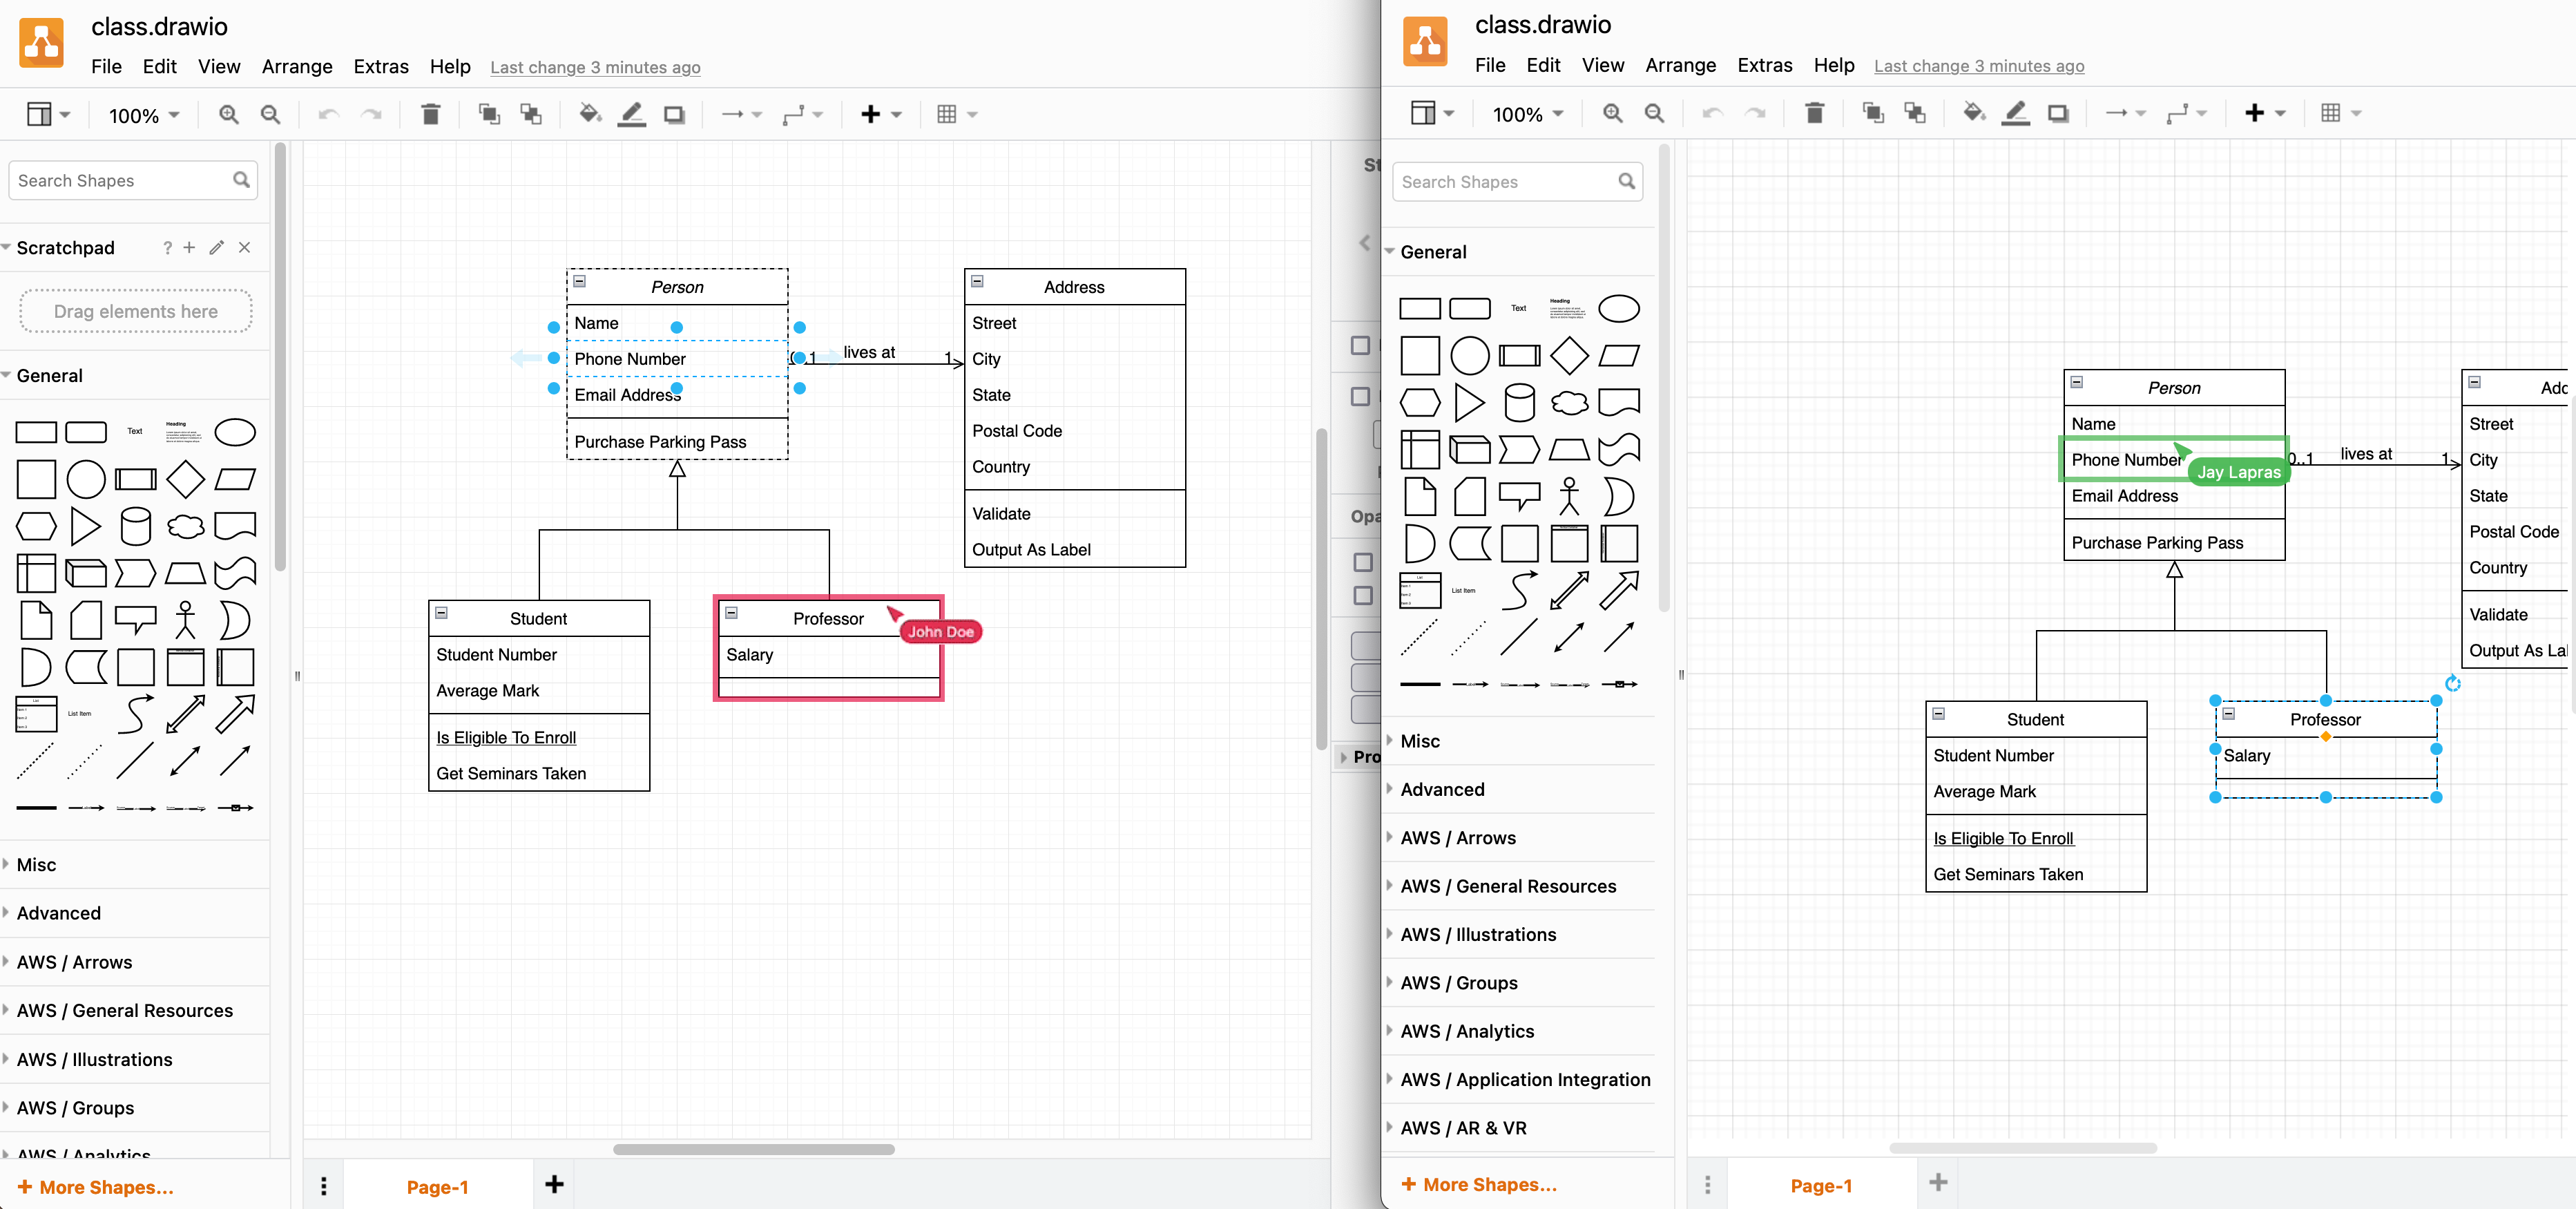 See how others edit and select parts of the diagram in real time in draw.io when you store diagram files in OneDrive or Google Drive